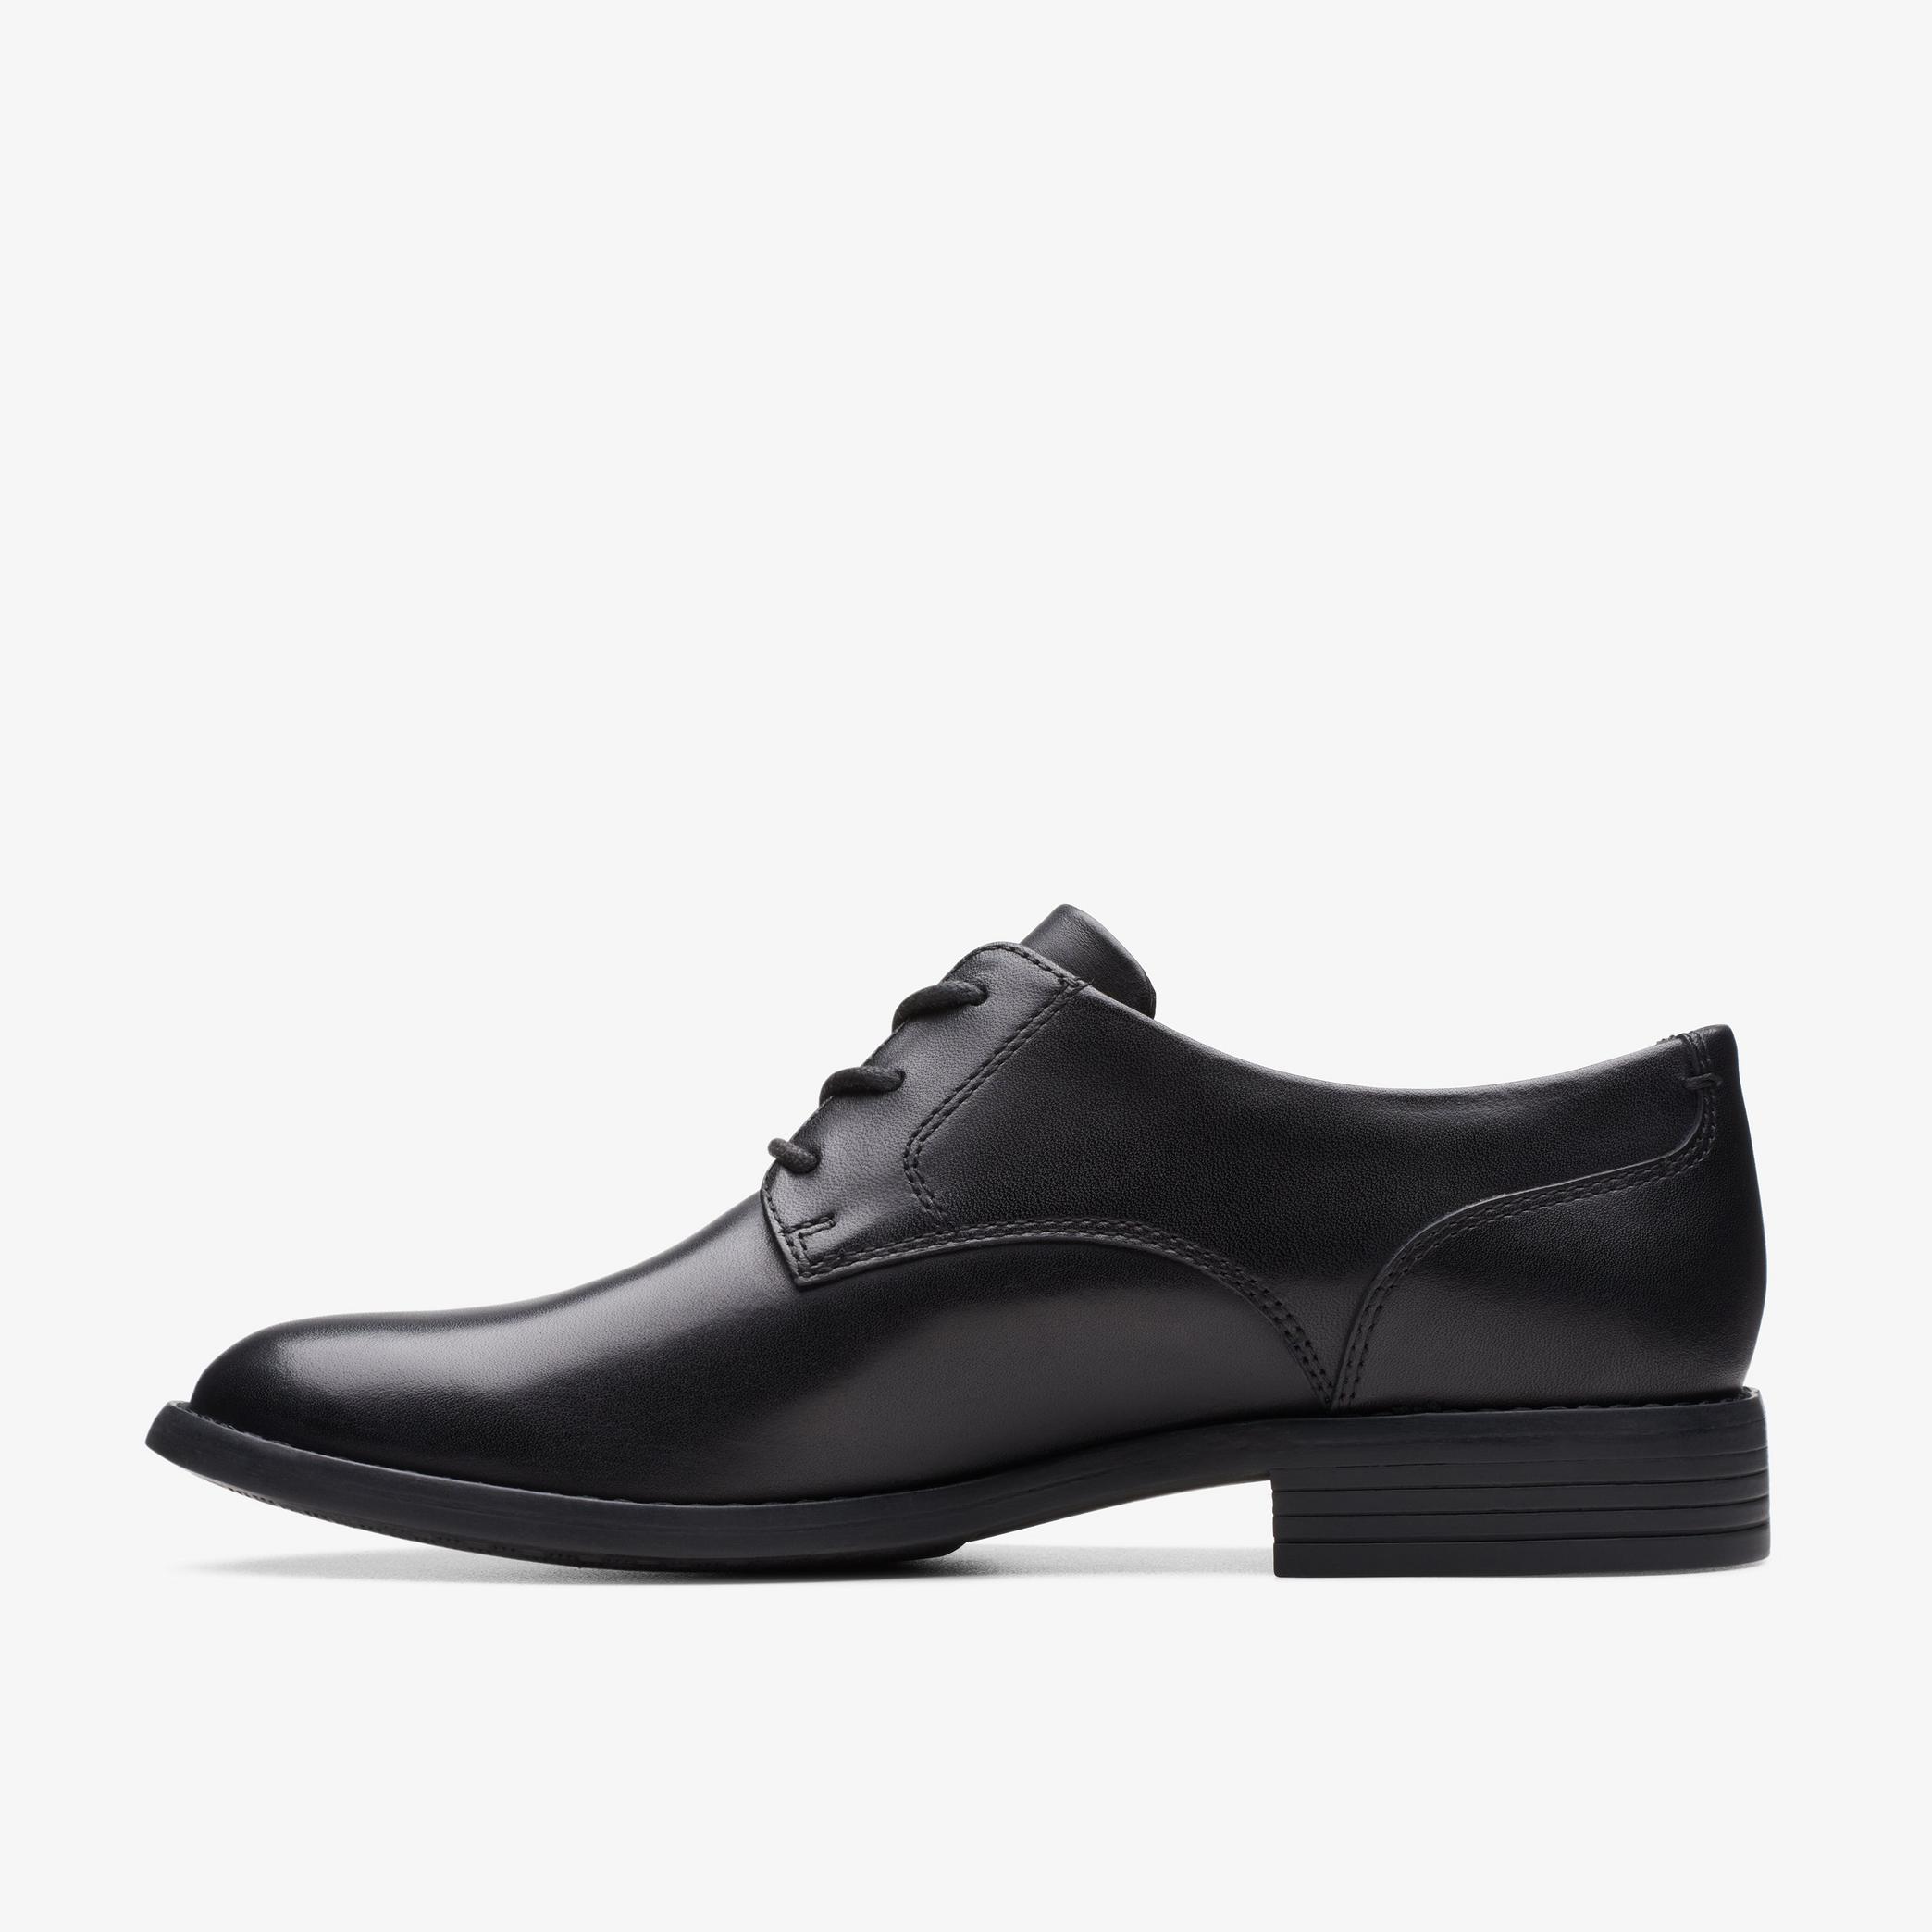 Camzin Iris Black Leather Derby Shoes, view 2 of 6